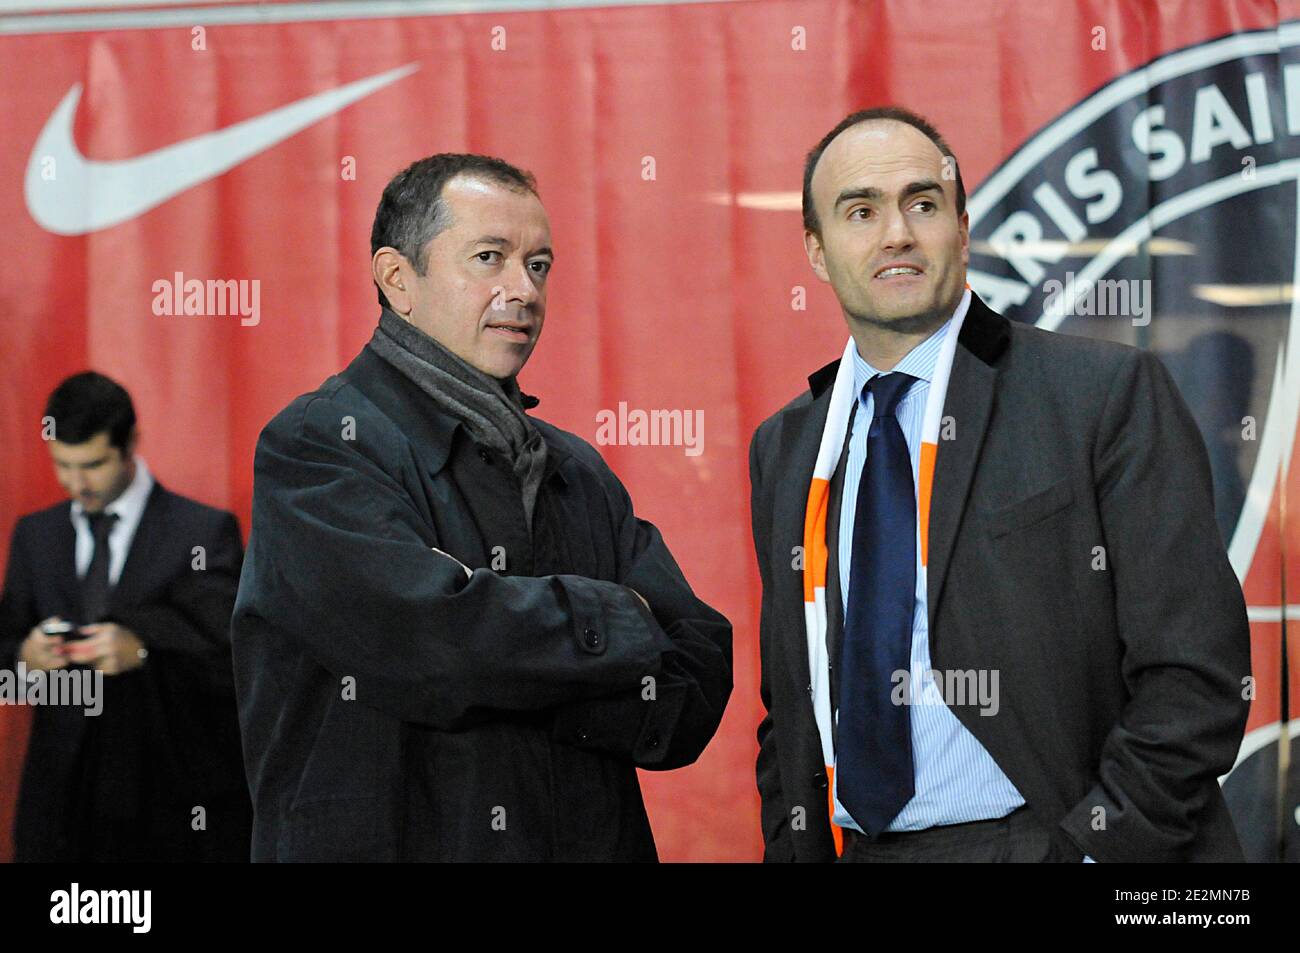 Lorient's president Loïc Ferry with PSG's President Robin Leproux during the French First league soccer match, Paris Saint Germain vs Lorient at the Parc des Princes in Paris, France on February 06, 2010. Lorient won 3-0. Photo by Thierry Plessis/ABACAPRESS.COM Stock Photo